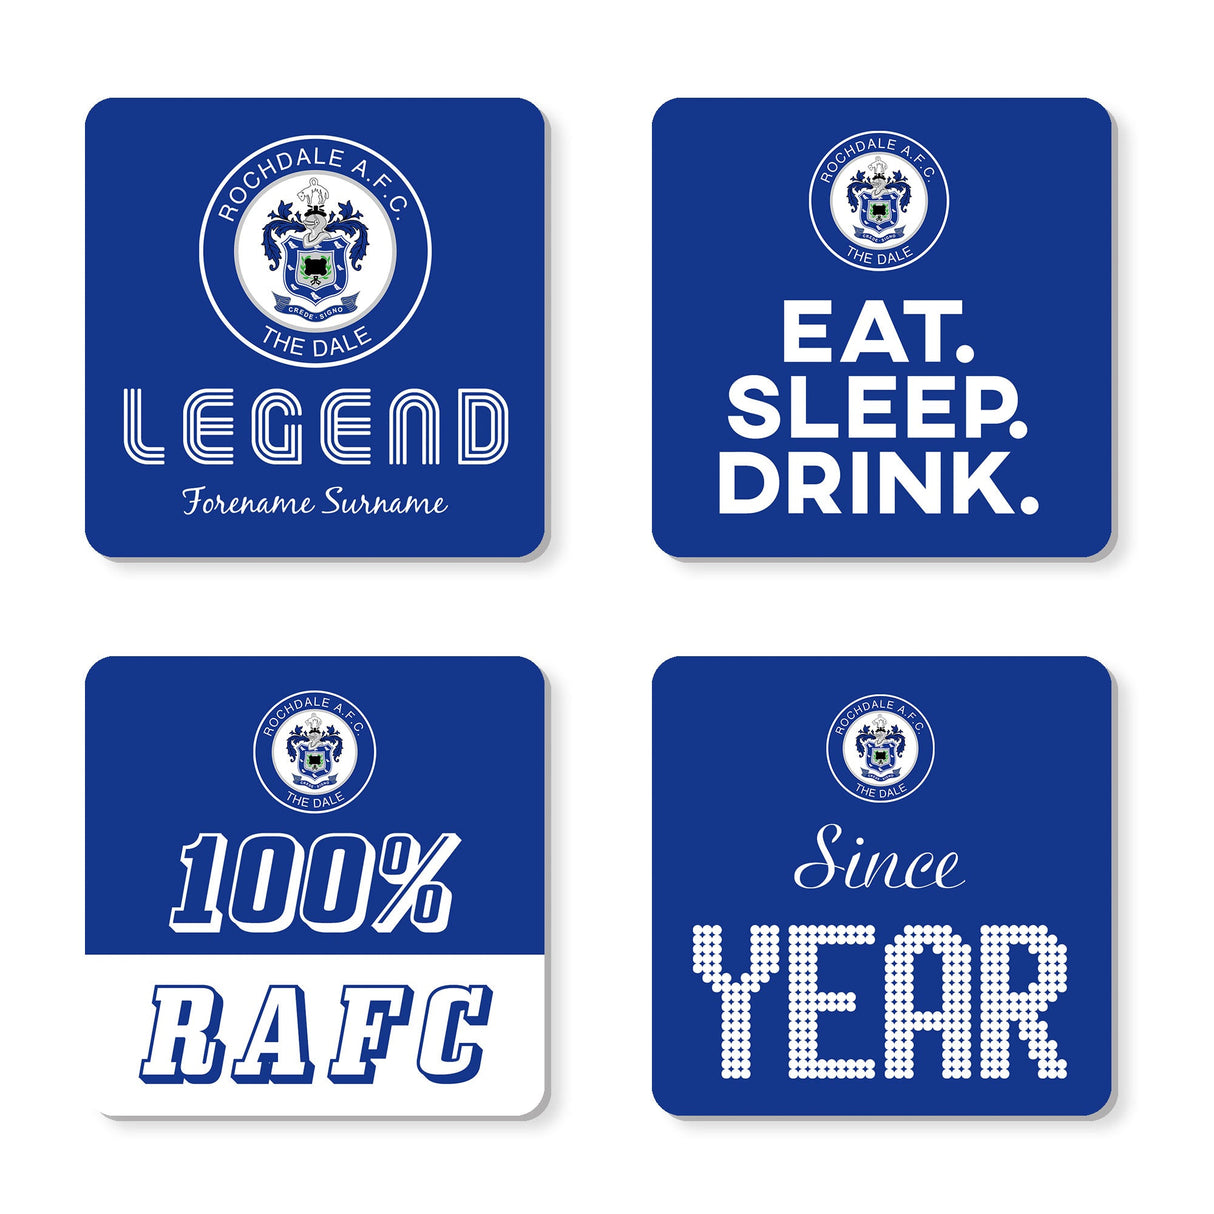 Personalised Rochdale AFC Coasters